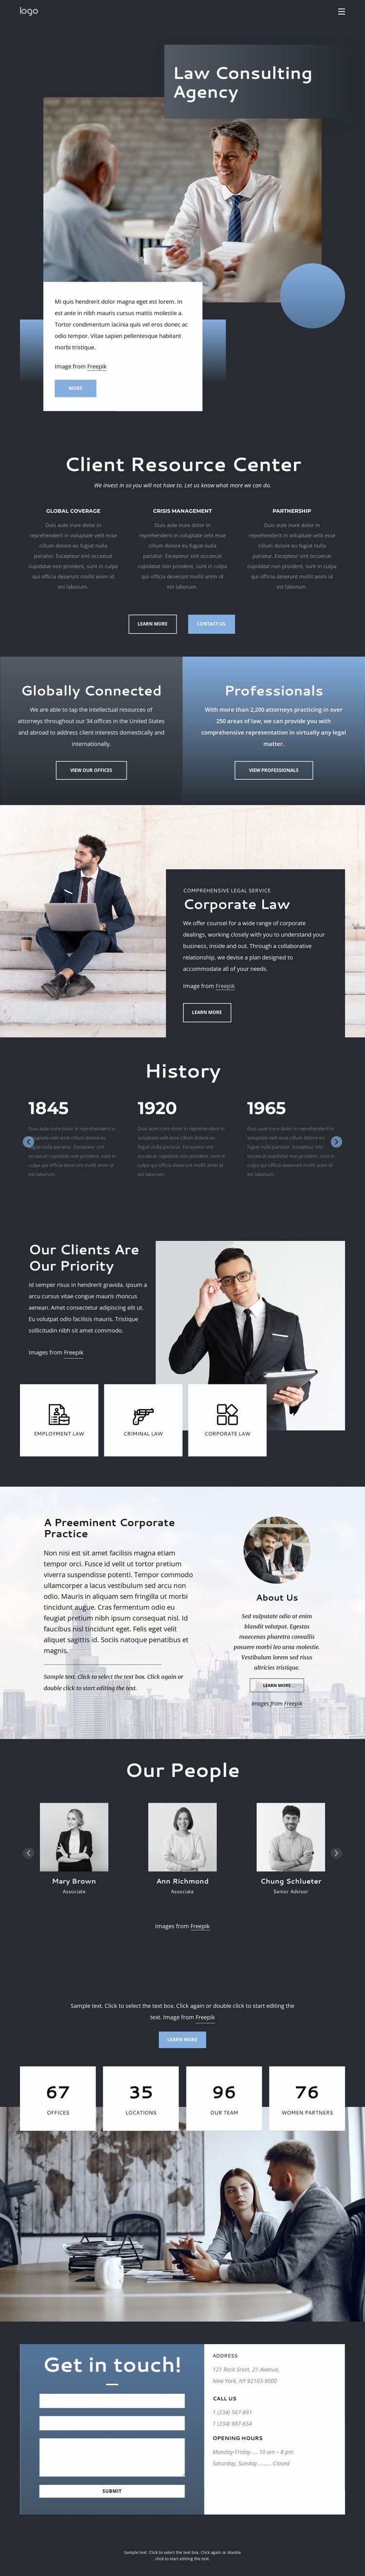 Law consulting agency Homepage Design